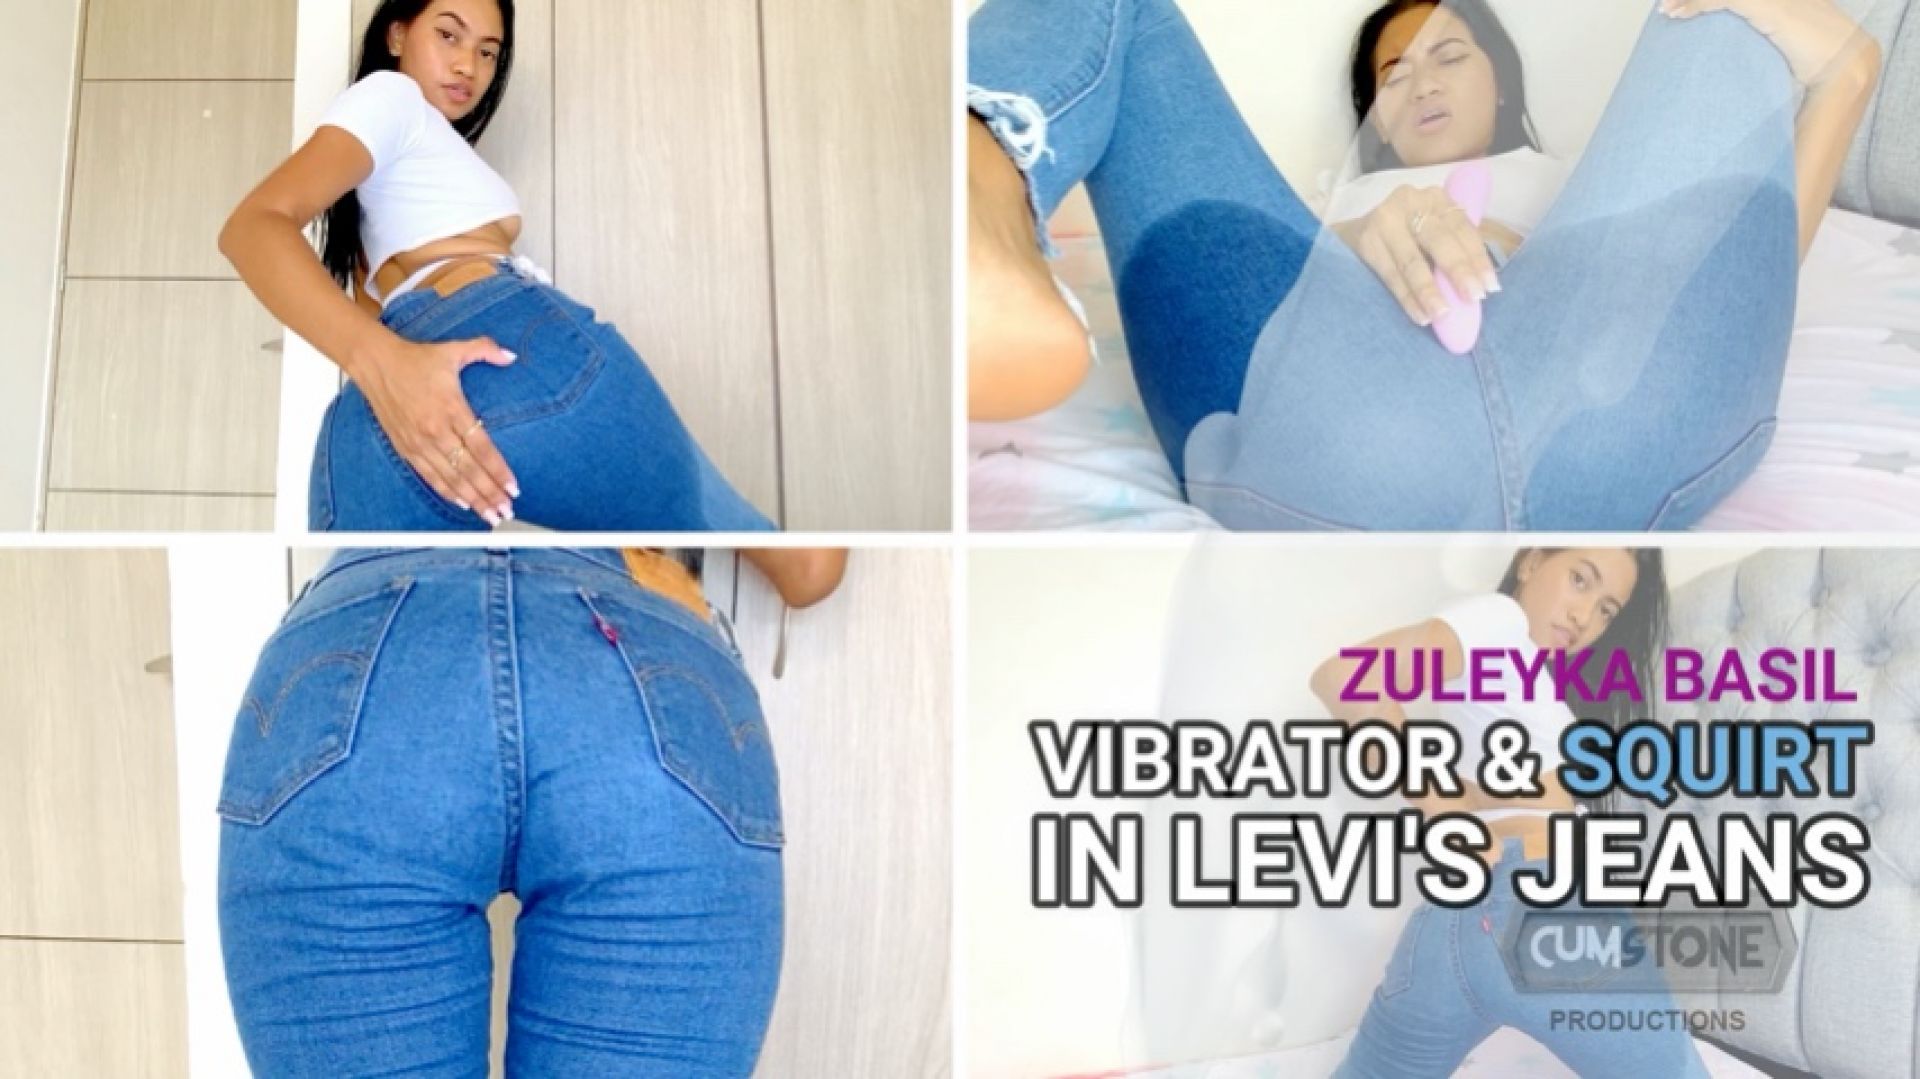 VIBRATOR AND SQUIRT IN LEVIS JEANS